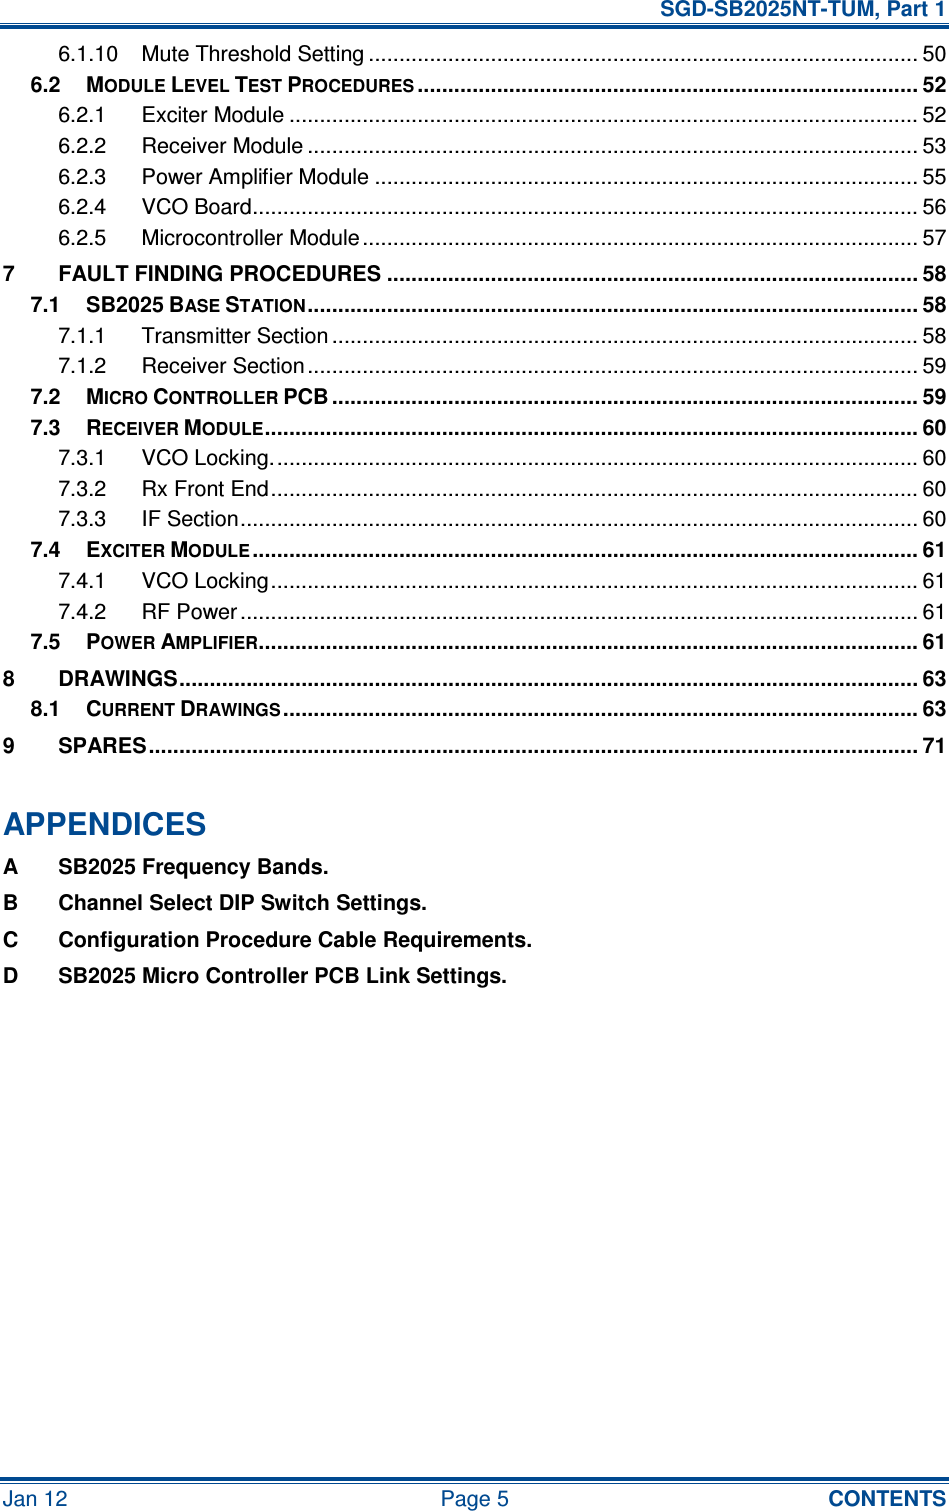   SGD-SB2025NT-TUM, Part 1 Jan 12  Page 5  CONTENTS 6.1.10 Mute Threshold Setting .......................................................................................... 50 6.2 MODULE LEVEL TEST PROCEDURES.................................................................................. 52 6.2.1 Exciter Module ....................................................................................................... 52 6.2.2 Receiver Module .................................................................................................... 53 6.2.3 Power Amplifier Module ......................................................................................... 55 6.2.4 VCO Board............................................................................................................. 56 6.2.5 Microcontroller Module........................................................................................... 57 7 FAULT FINDING PROCEDURES ....................................................................................... 58 7.1 SB2025 BASE STATION.................................................................................................... 58 7.1.1 Transmitter Section ................................................................................................ 58 7.1.2 Receiver Section .................................................................................................... 59 7.2 MICRO CONTROLLER PCB ................................................................................................ 59 7.3 RECEIVER MODULE........................................................................................................... 60 7.3.1 VCO Locking.......................................................................................................... 60 7.3.2 Rx Front End.......................................................................................................... 60 7.3.3 IF Section............................................................................................................... 60 7.4 EXCITER MODULE............................................................................................................. 61 7.4.1 VCO Locking.......................................................................................................... 61 7.4.2 RF Power............................................................................................................... 61 7.5 POWER AMPLIFIER............................................................................................................ 61 8 DRAWINGS......................................................................................................................... 63 8.1 CURRENT DRAWINGS........................................................................................................ 63 9 SPARES.............................................................................................................................. 71  APPENDICES A  SB2025 Frequency Bands. B  Channel Select DIP Switch Settings. C  Configuration Procedure Cable Requirements. D  SB2025 Micro Controller PCB Link Settings.   